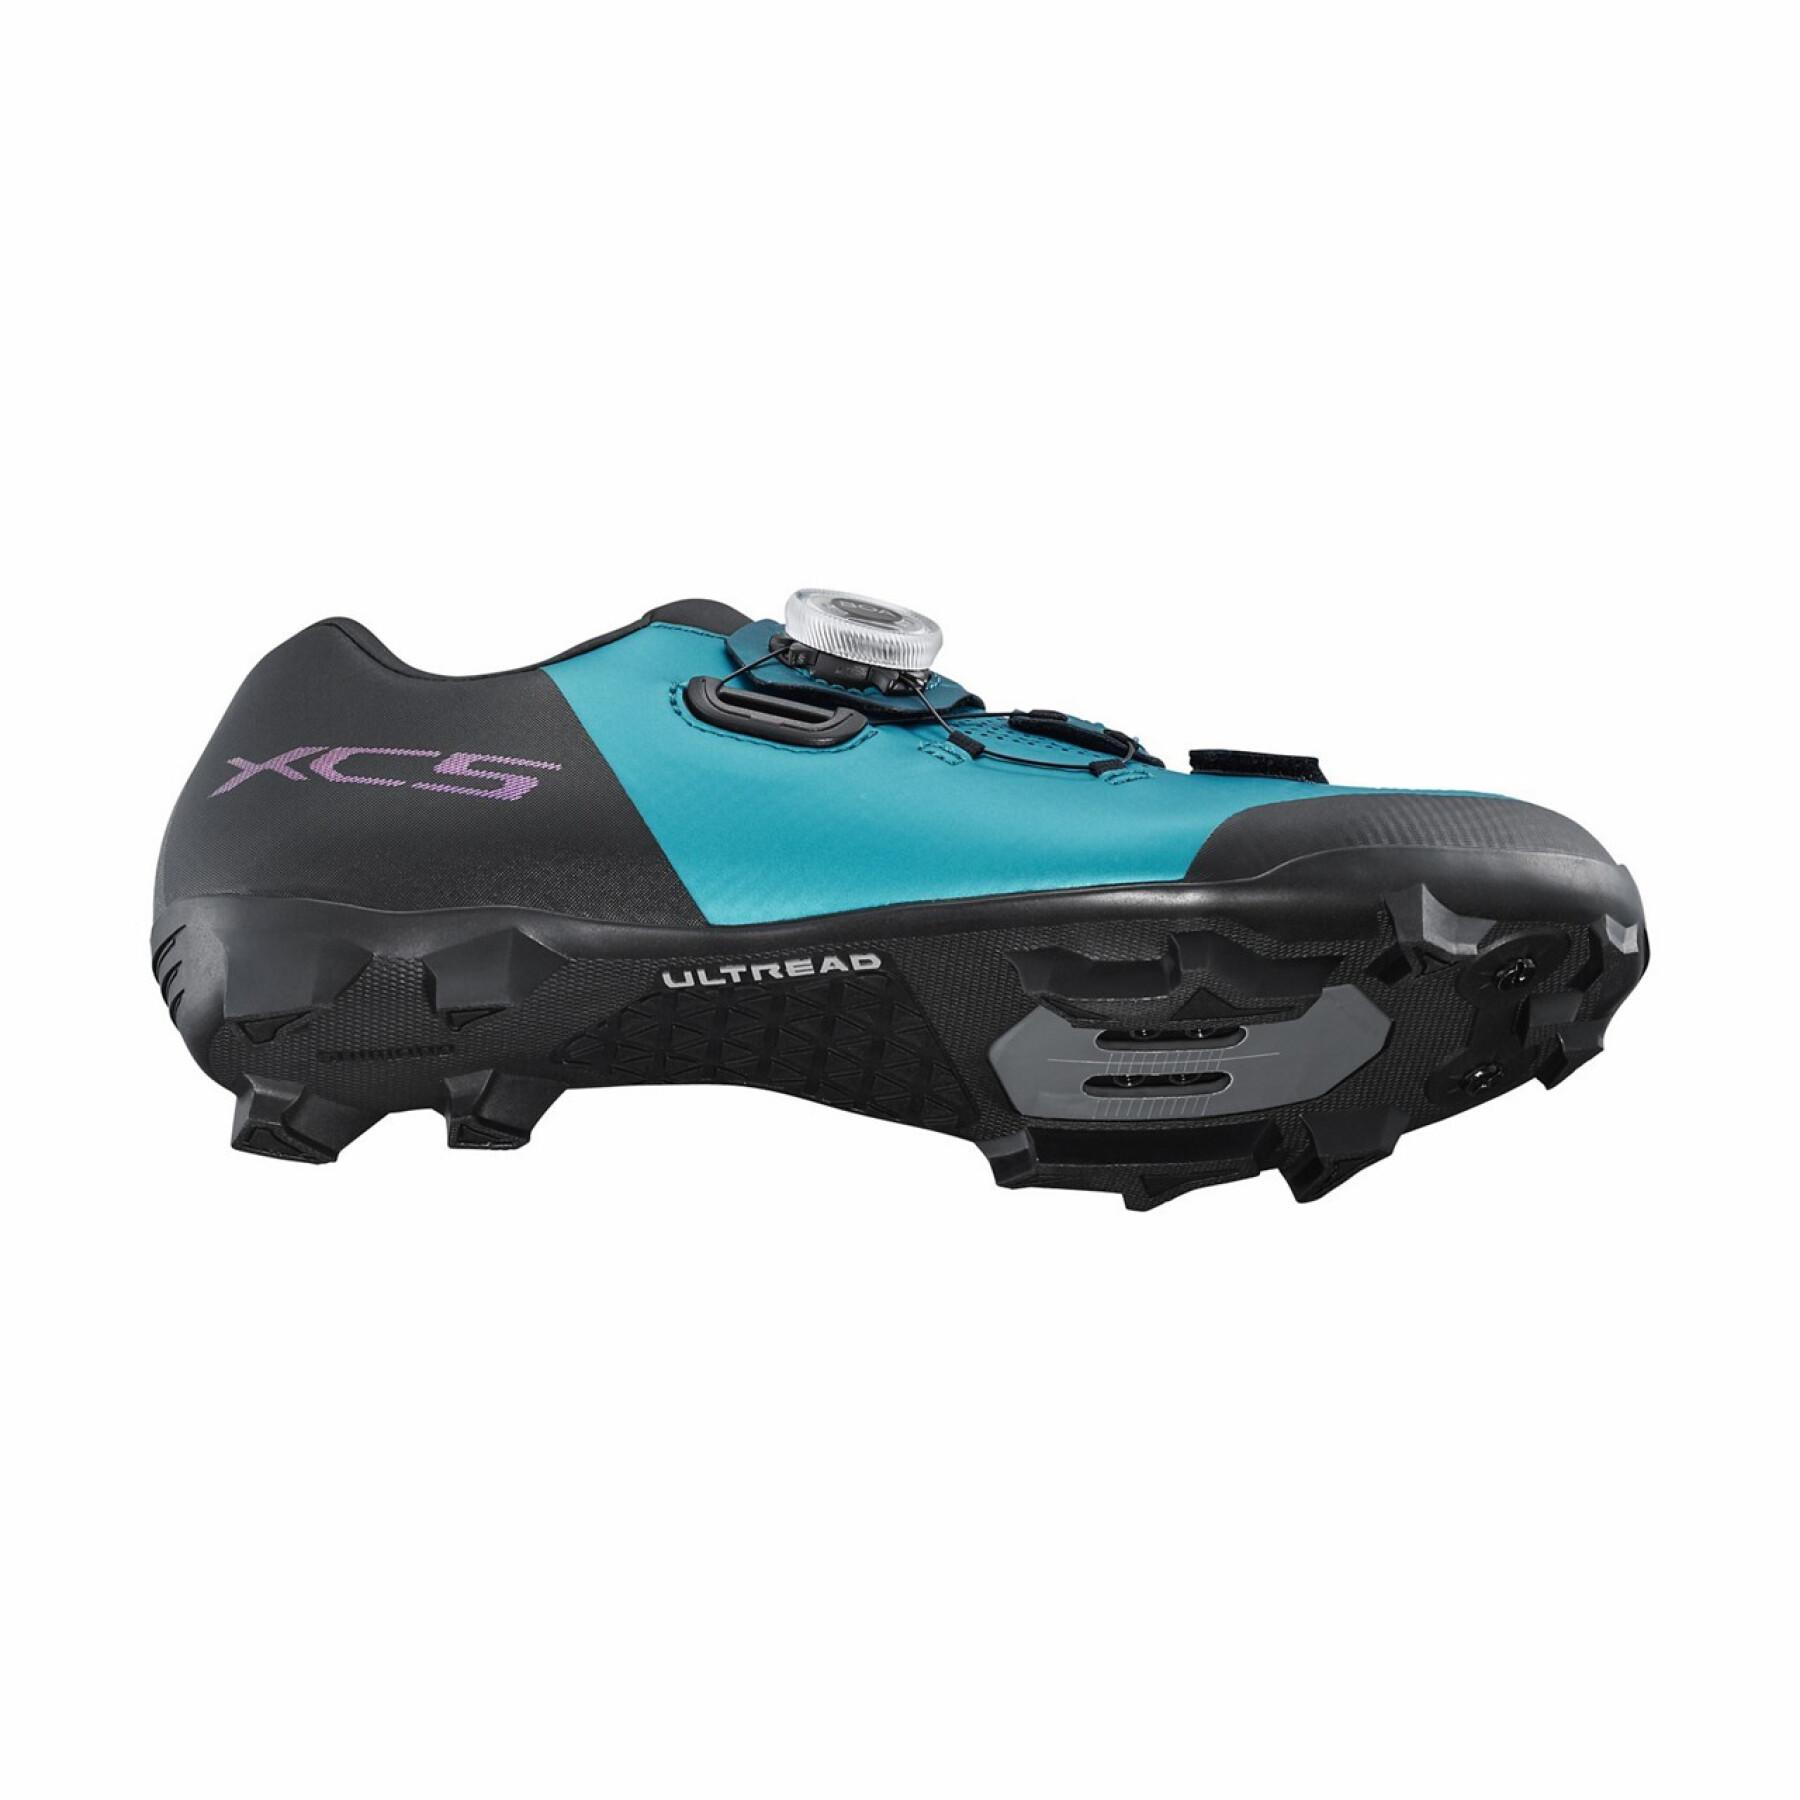 Chaussures femme Shimano SH-XC502